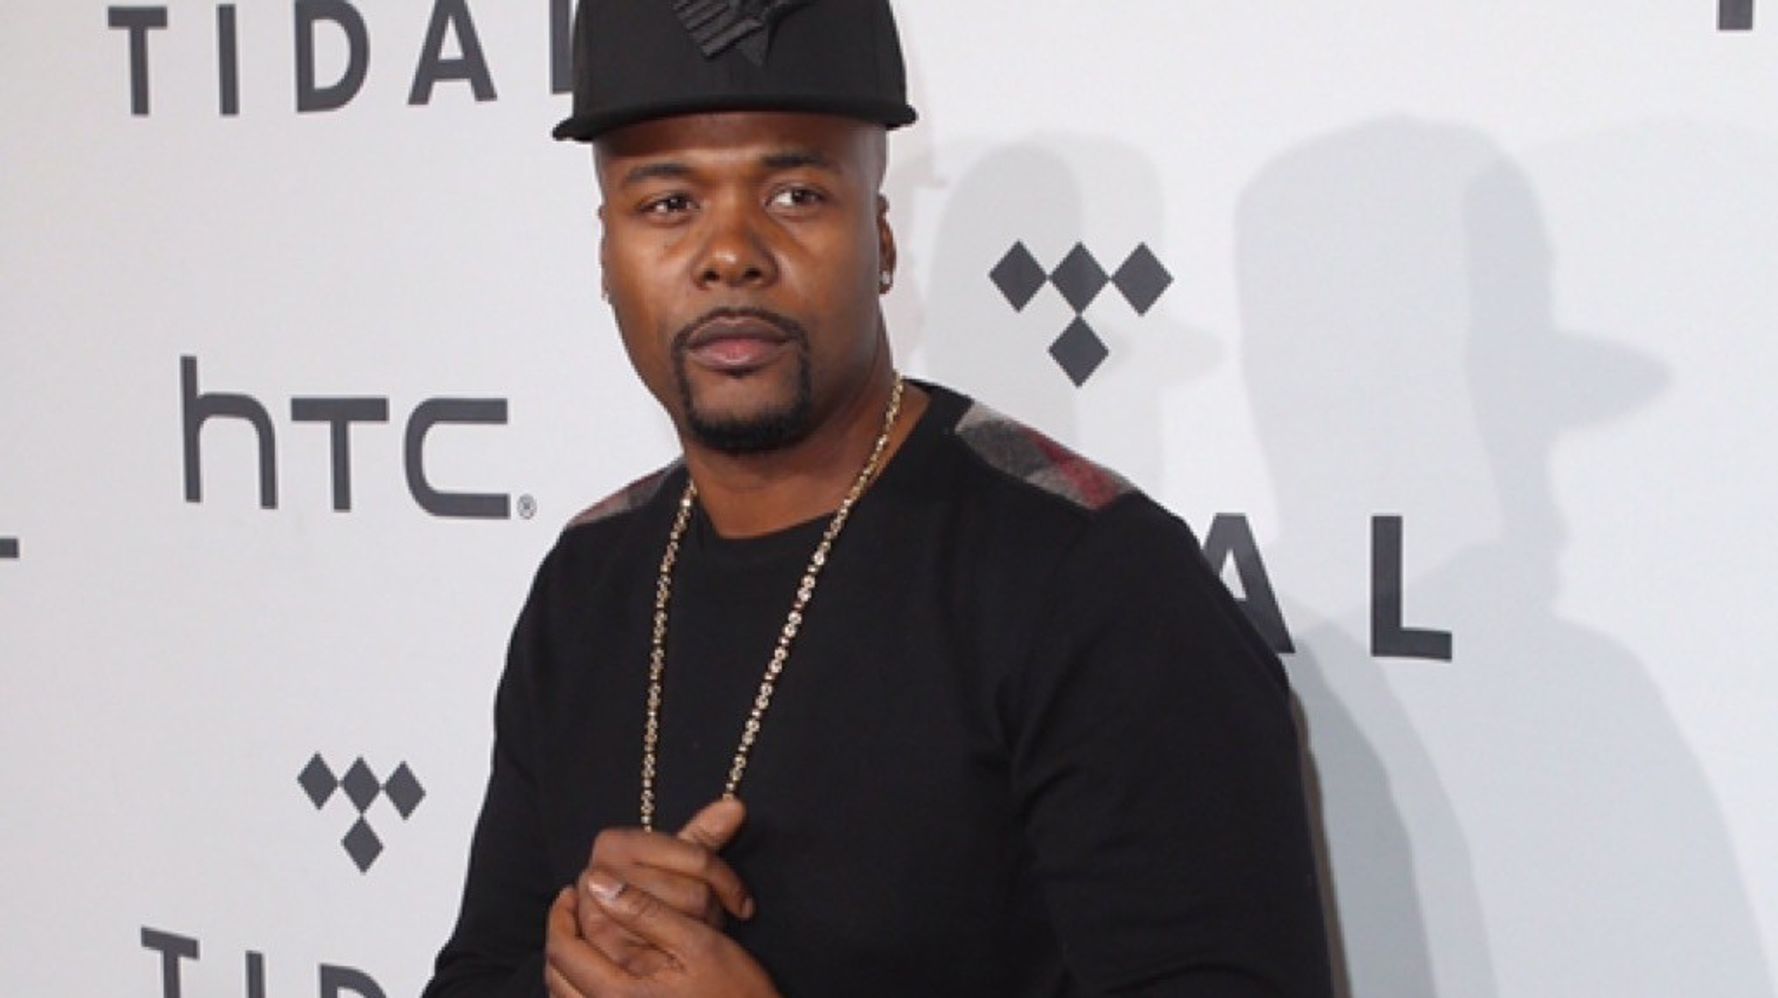 From Round Here To Here The Evolution of Memphis Bleek From Artist to